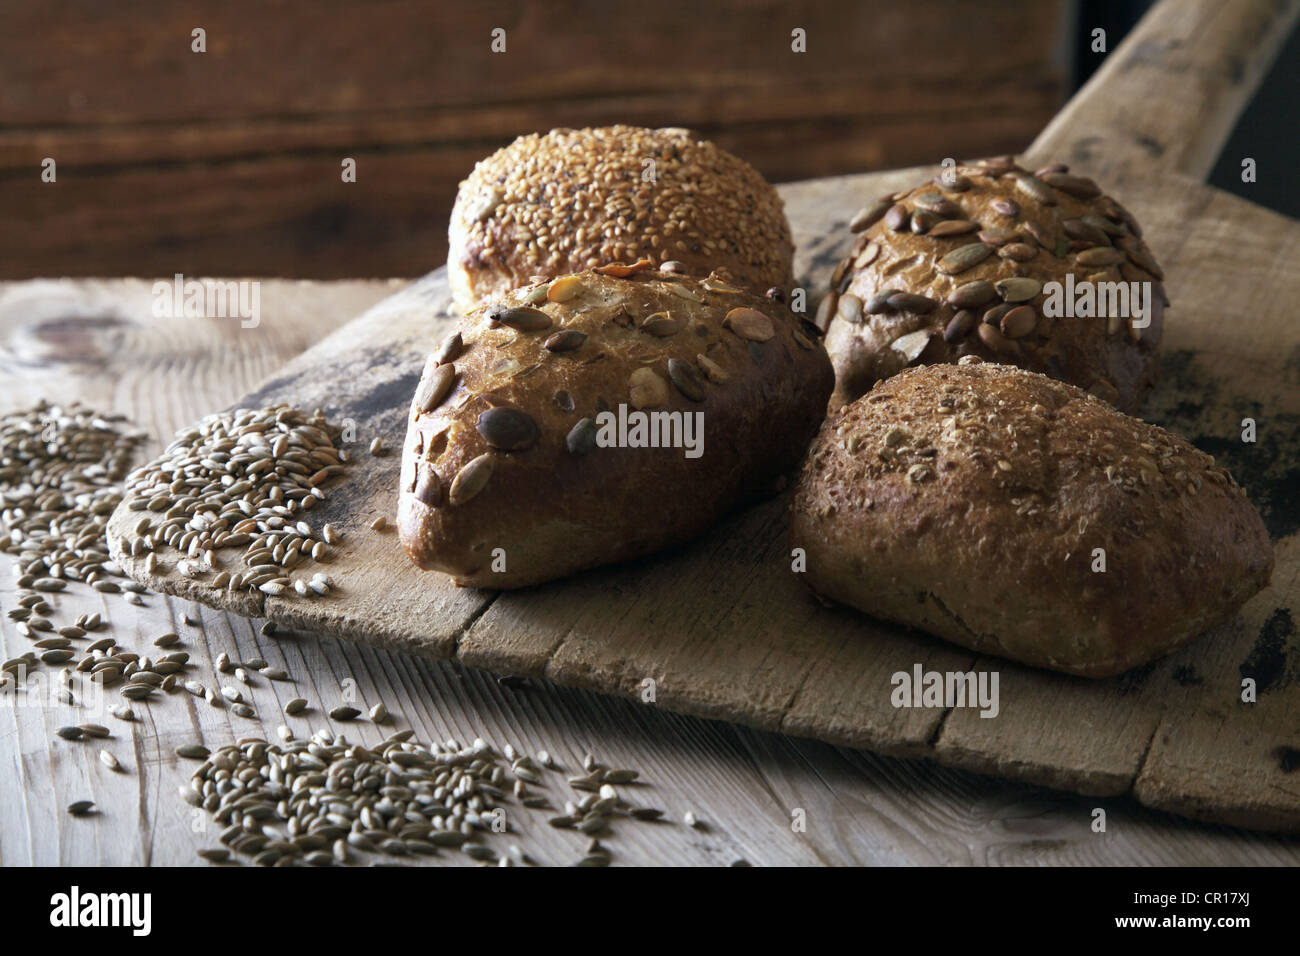 Rye bread rolls on an old bread slide with rye grains Stock Photo